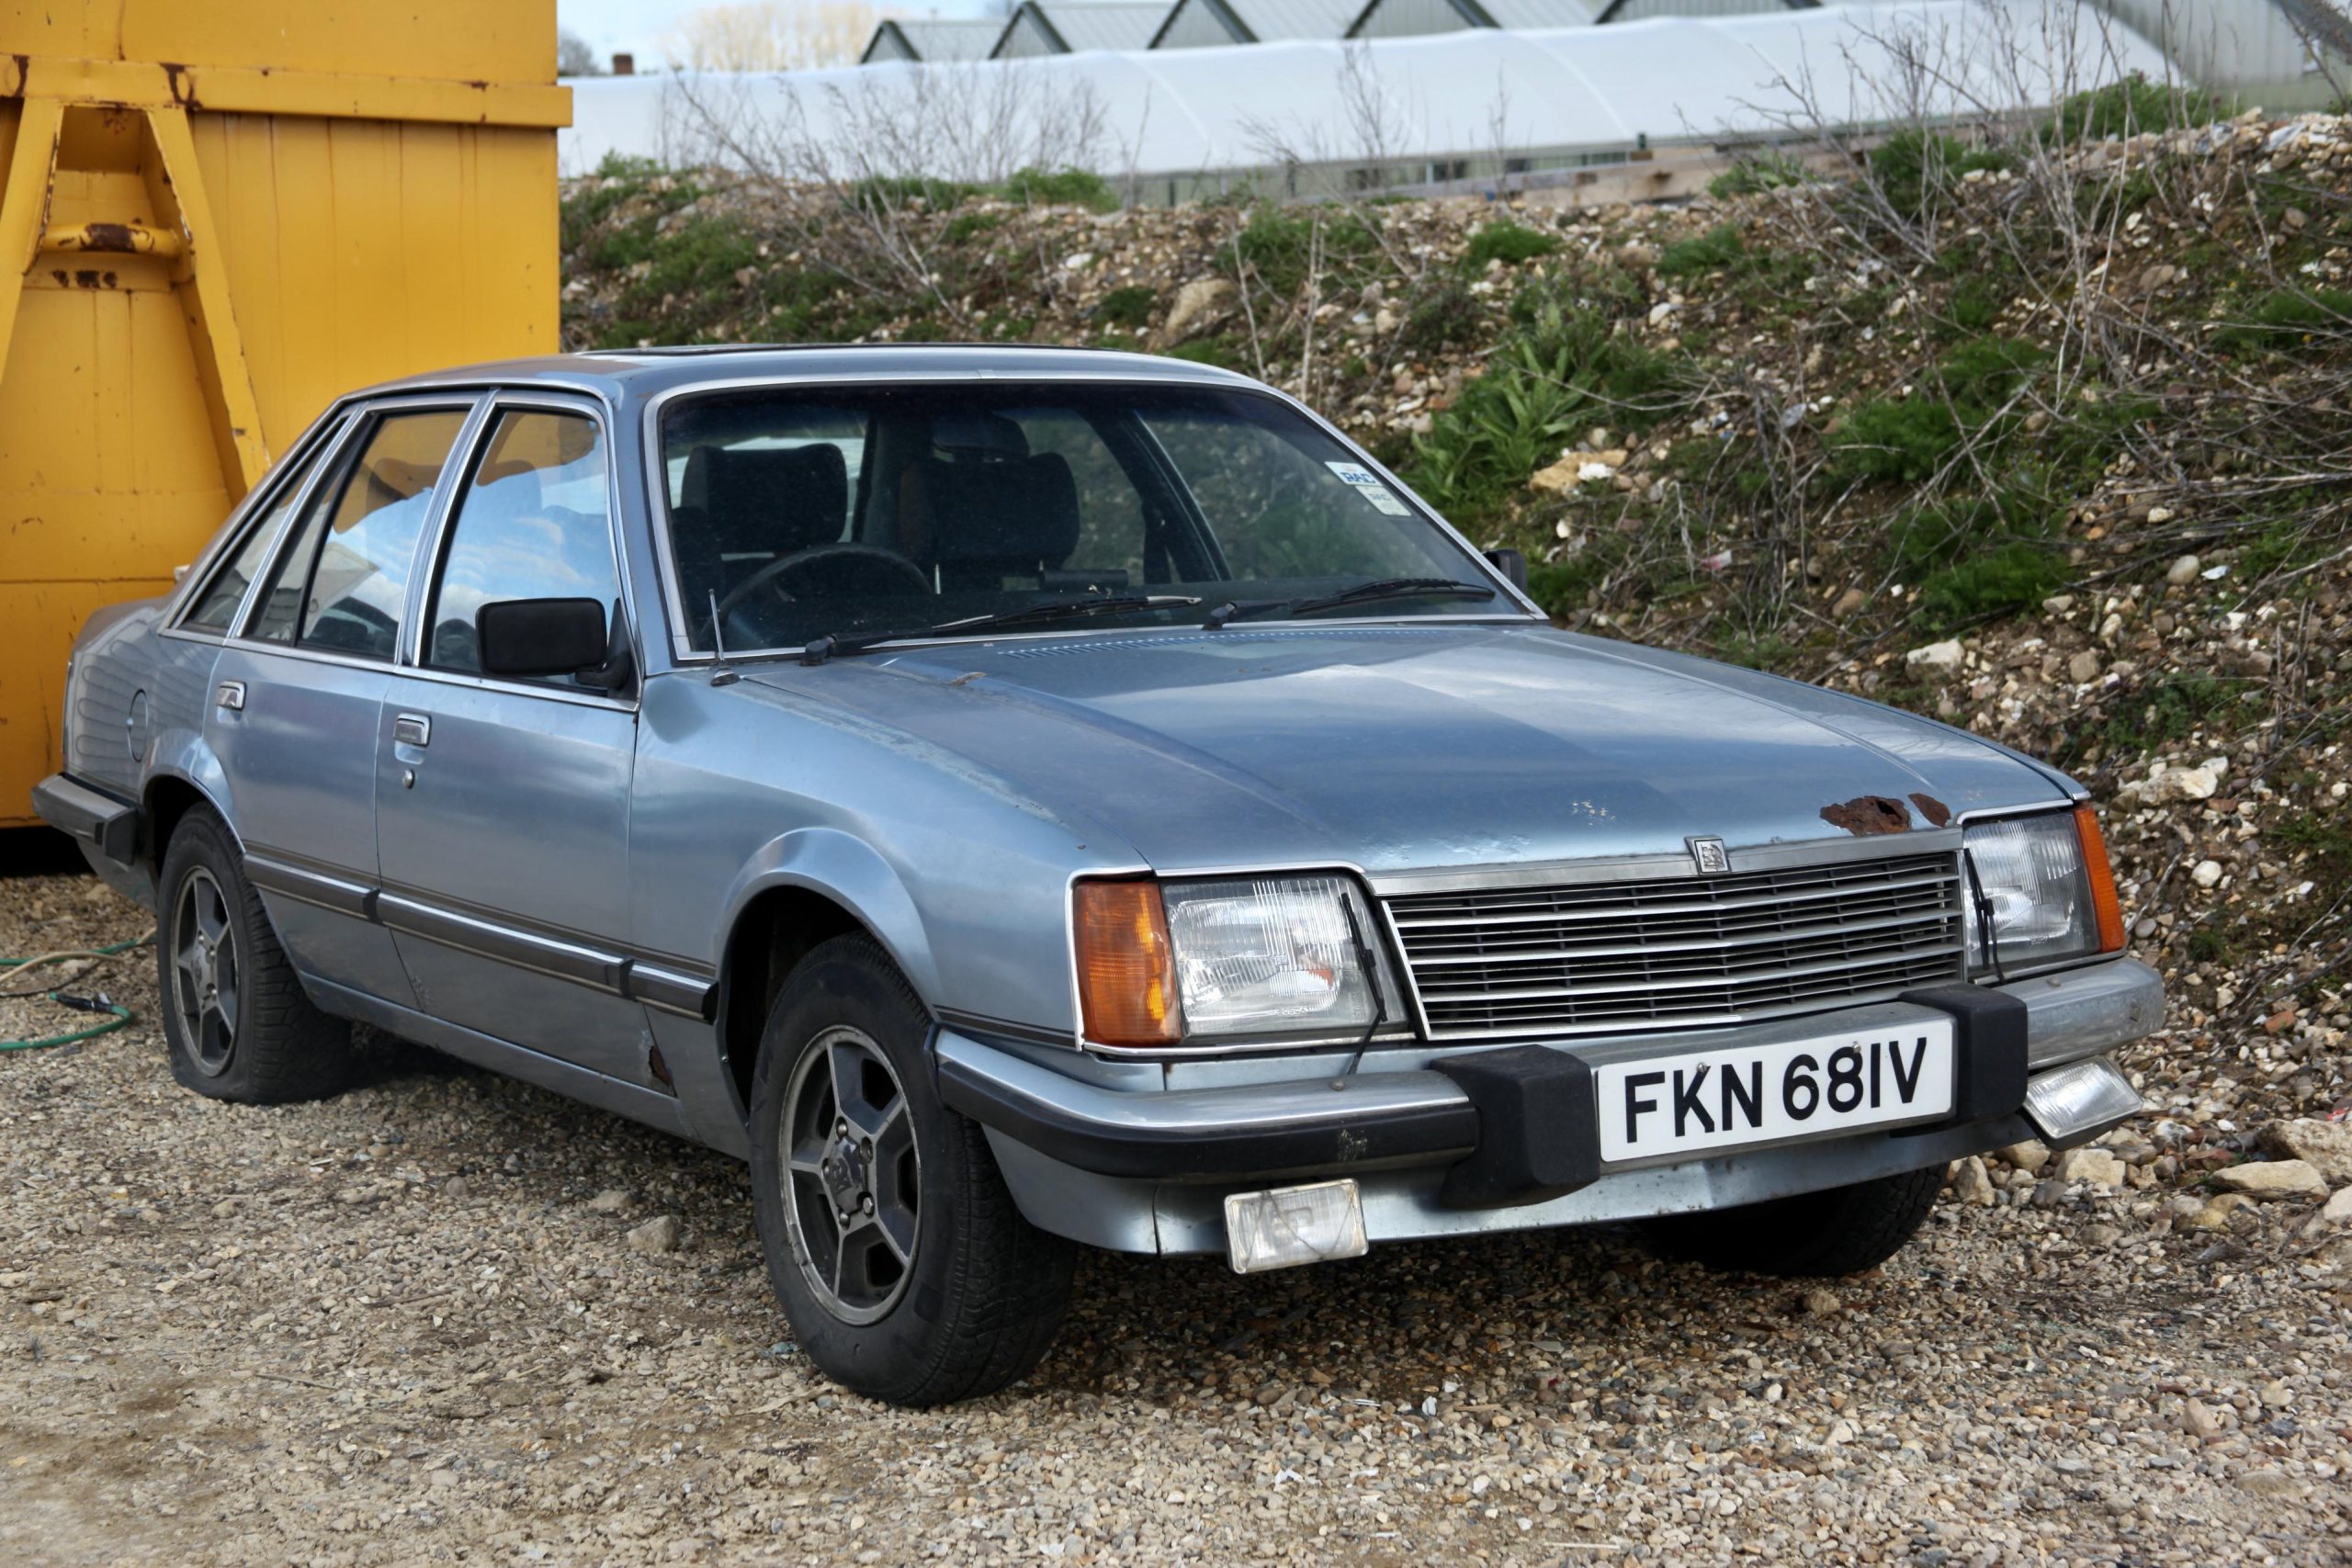 Lost Royale: The four-door saloon was Vauxhall’s crowning glory